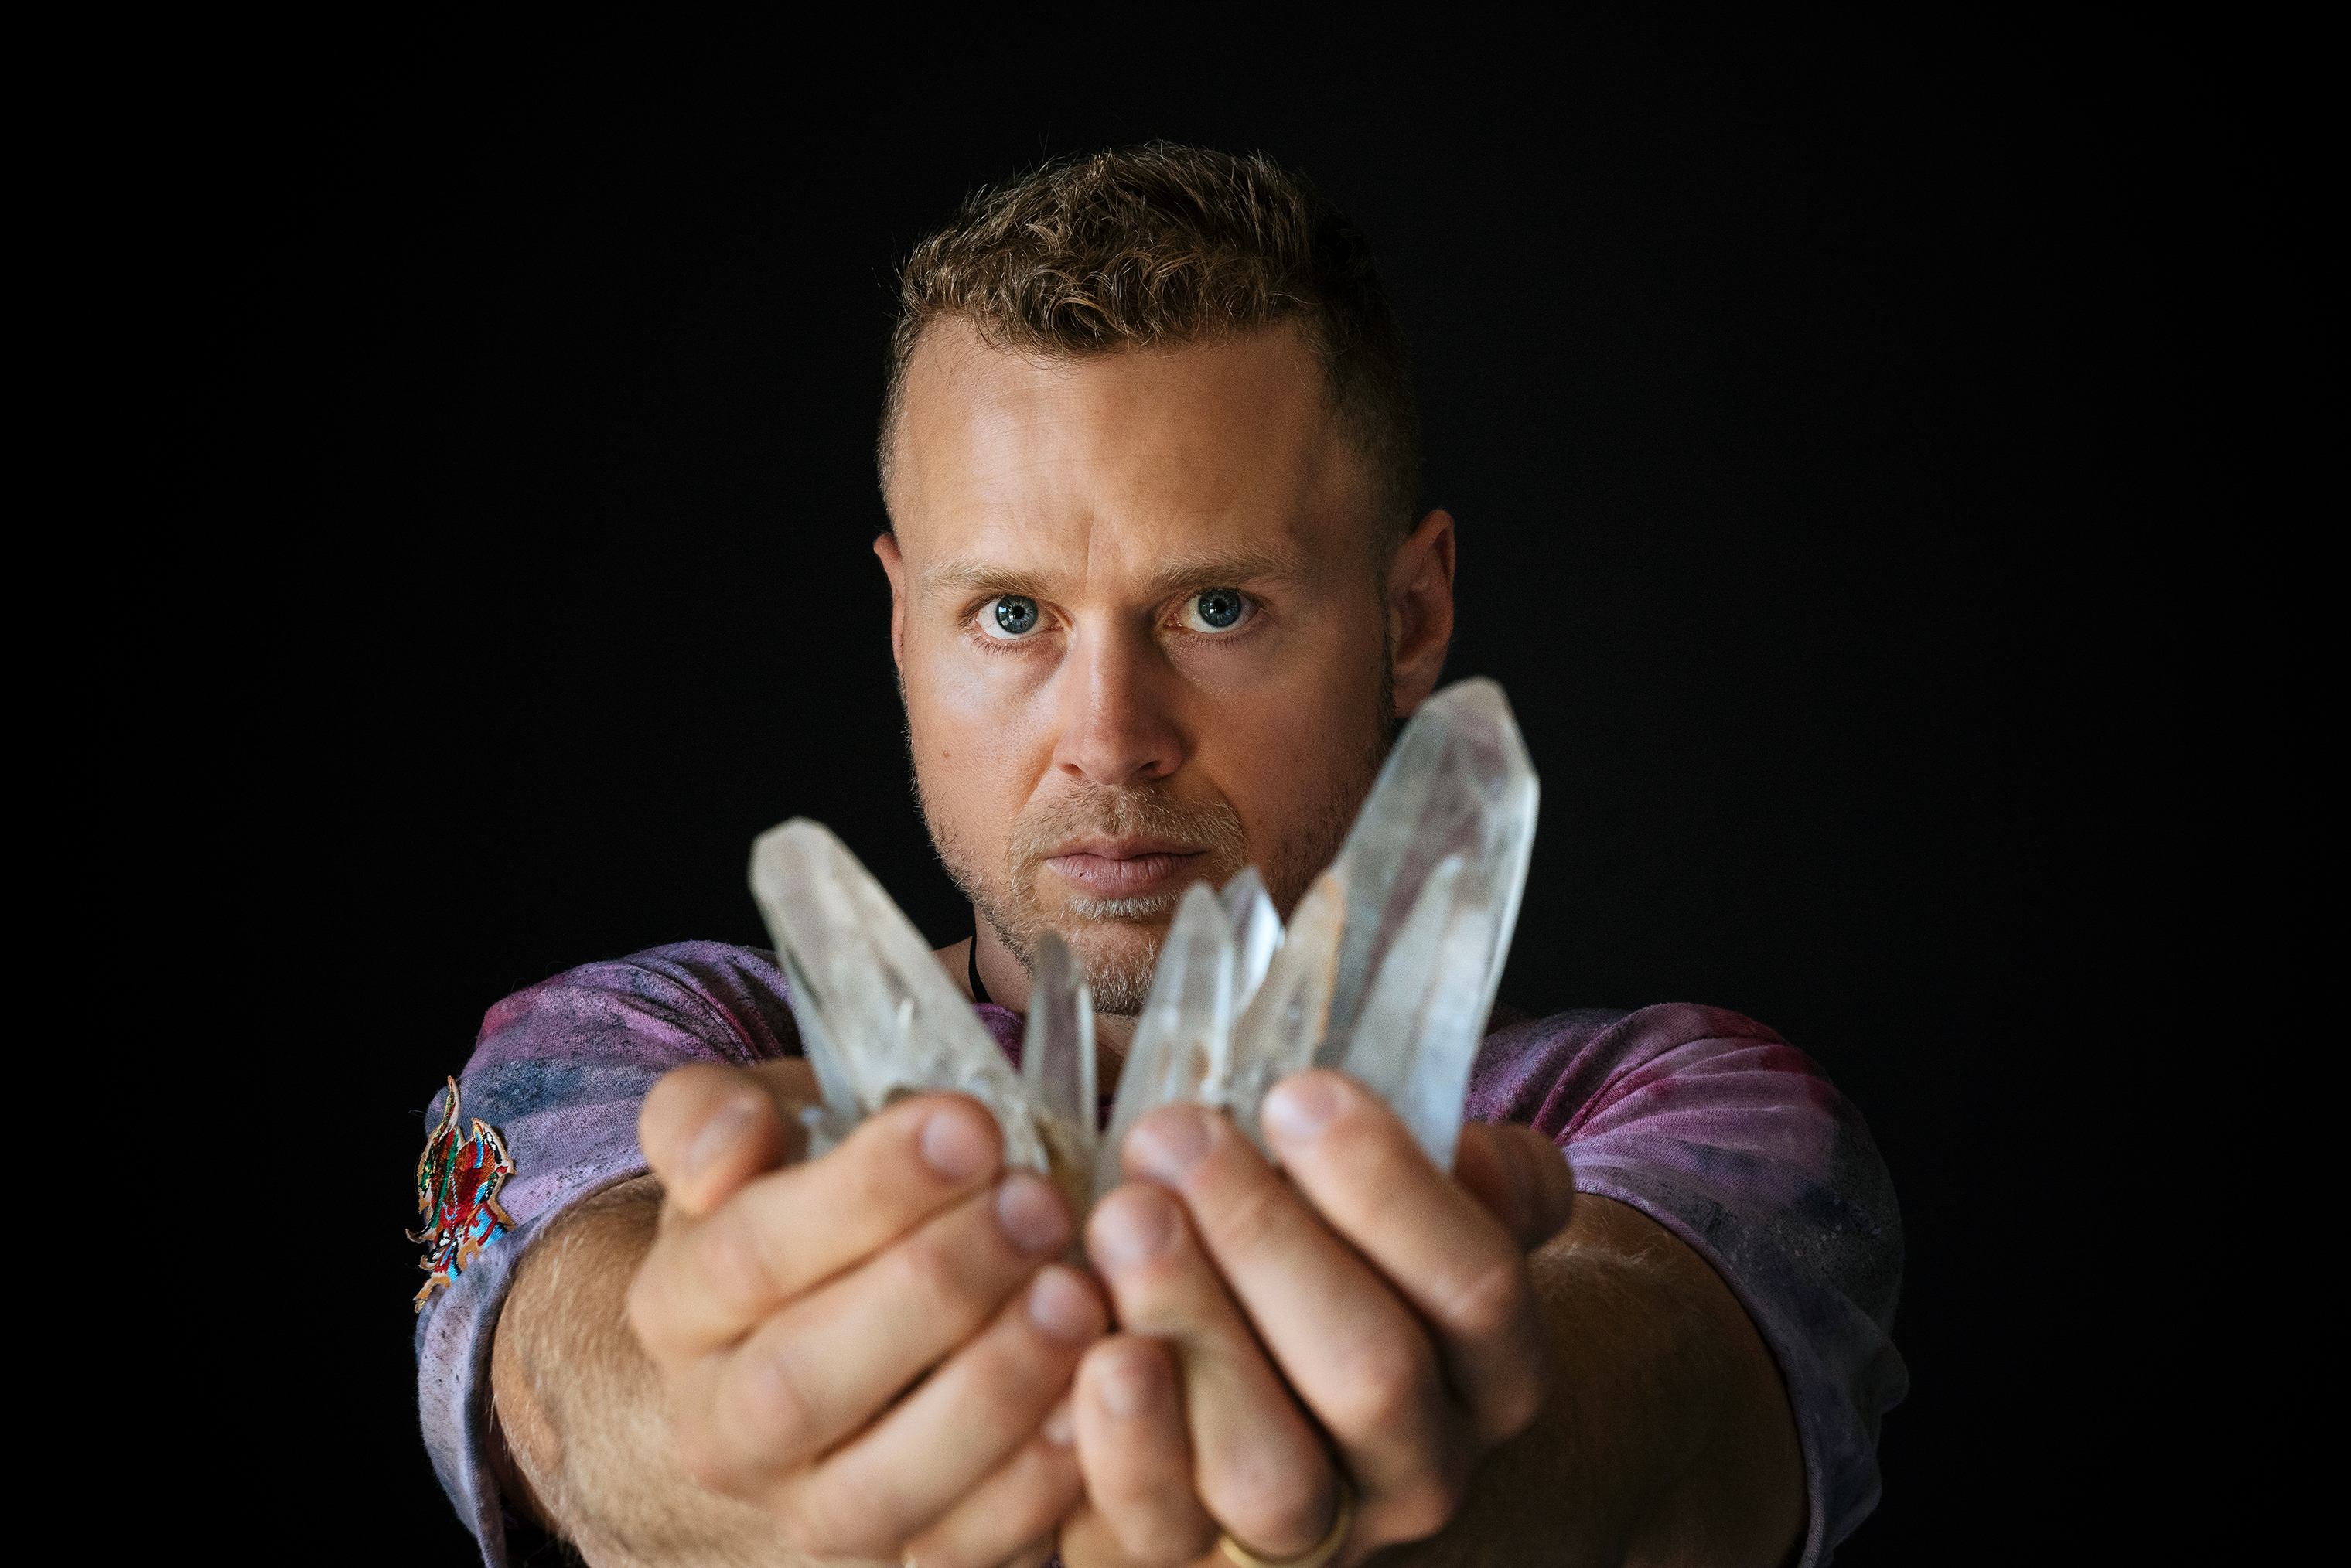 Spencer Pratt holds a lemurian quartz crystal from his collection at his home in the Pacific Palisades neighborhood of Los Angeles, California on Friday, June 22, 2018.